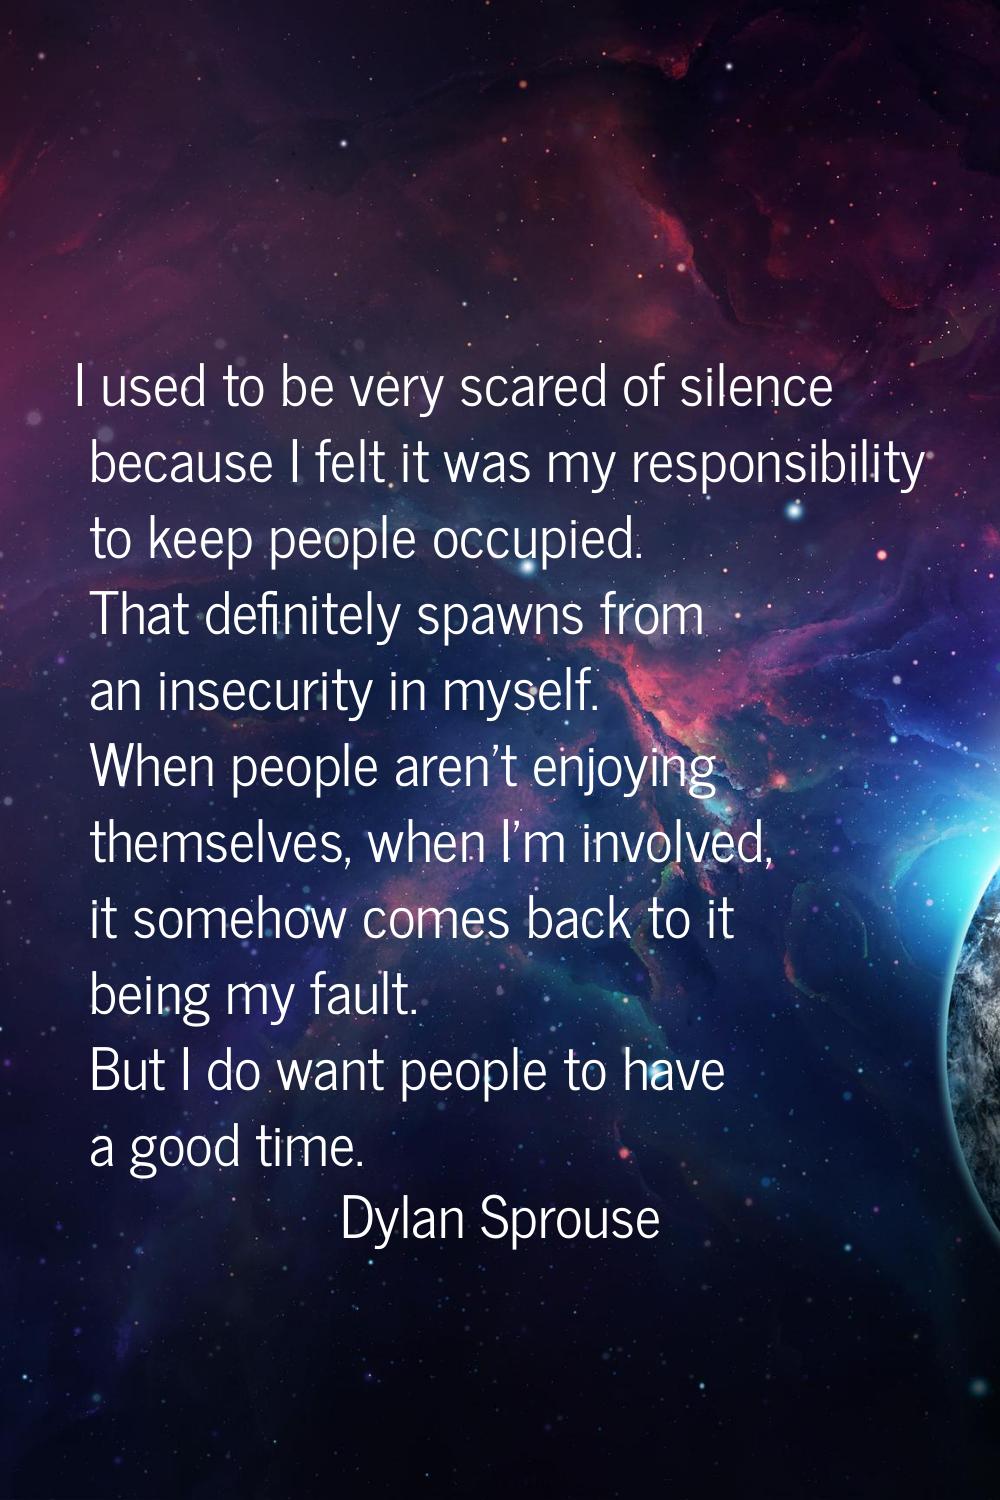 I used to be very scared of silence because I felt it was my responsibility to keep people occupied